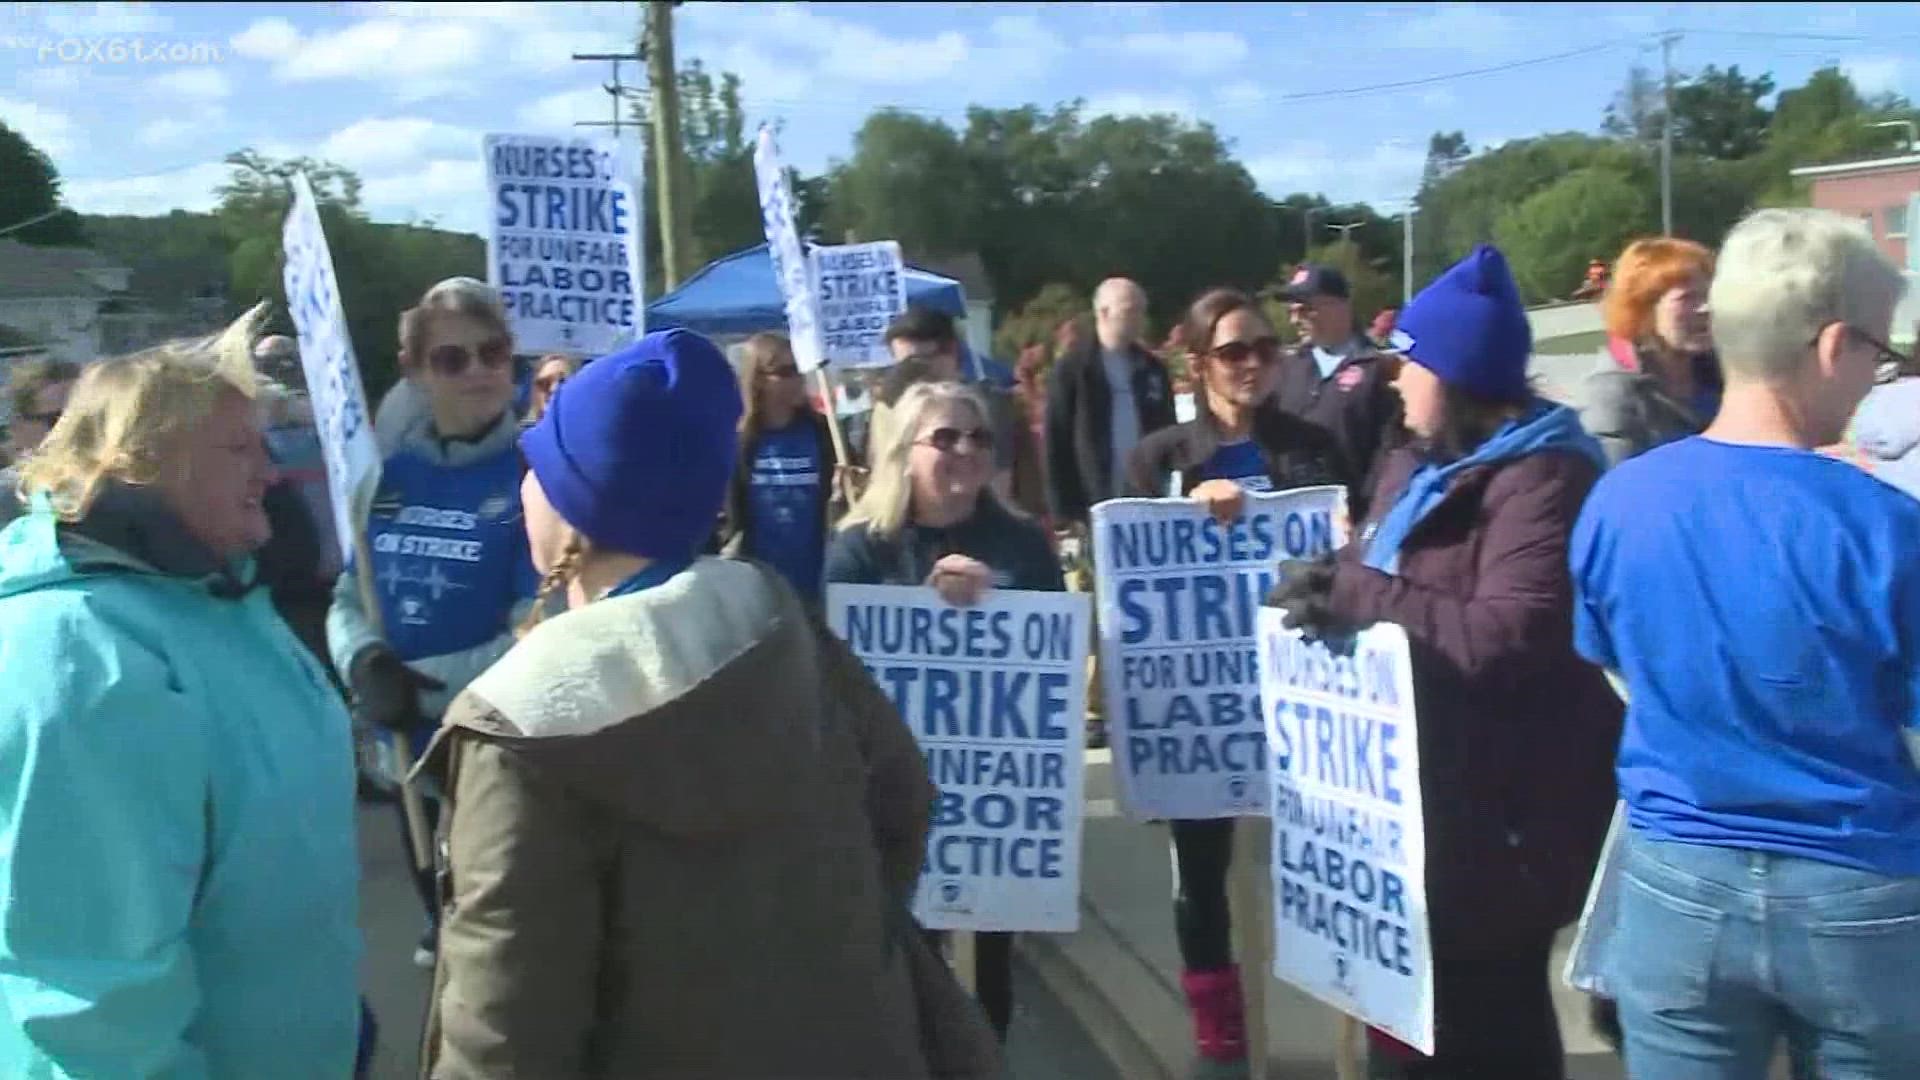 The 100 nurses in Local Union 5041 say they want better pay, better insurance, and no more mandatory overtime. They say they're facing unfair labor conditions.